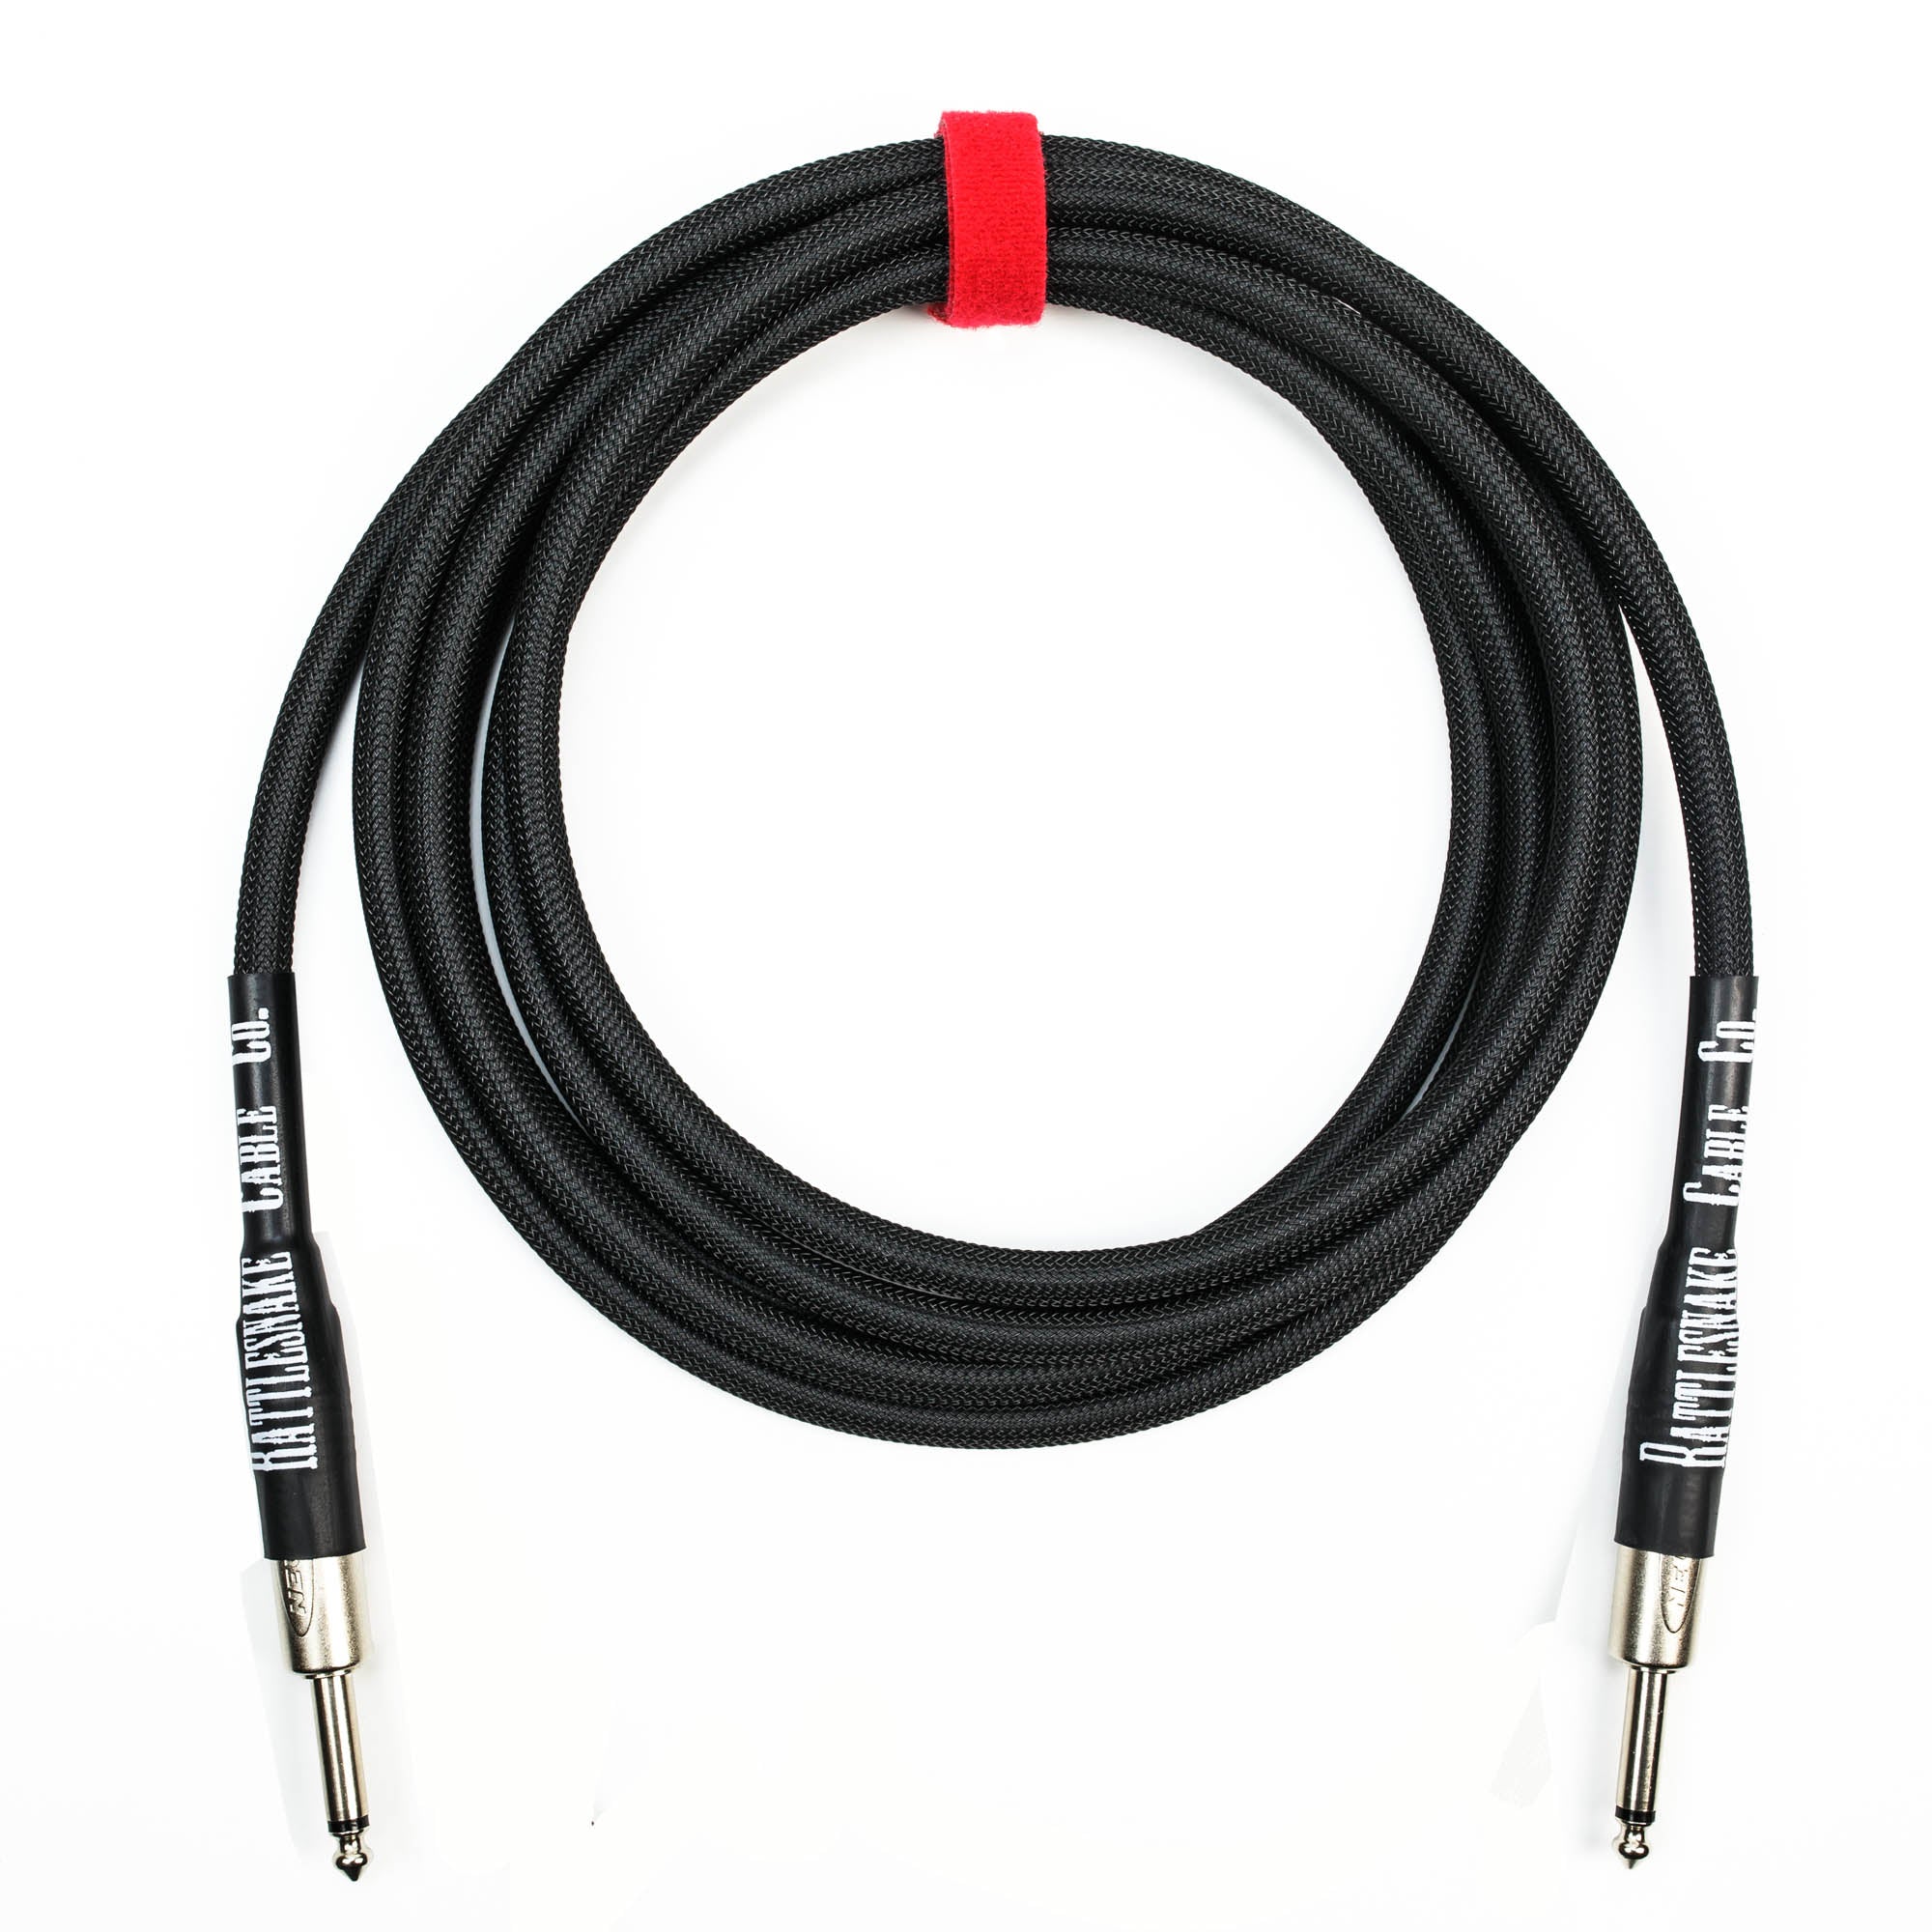 Rattlesnake Cable Company 10' Black Guitar Cable - Straight Plugs